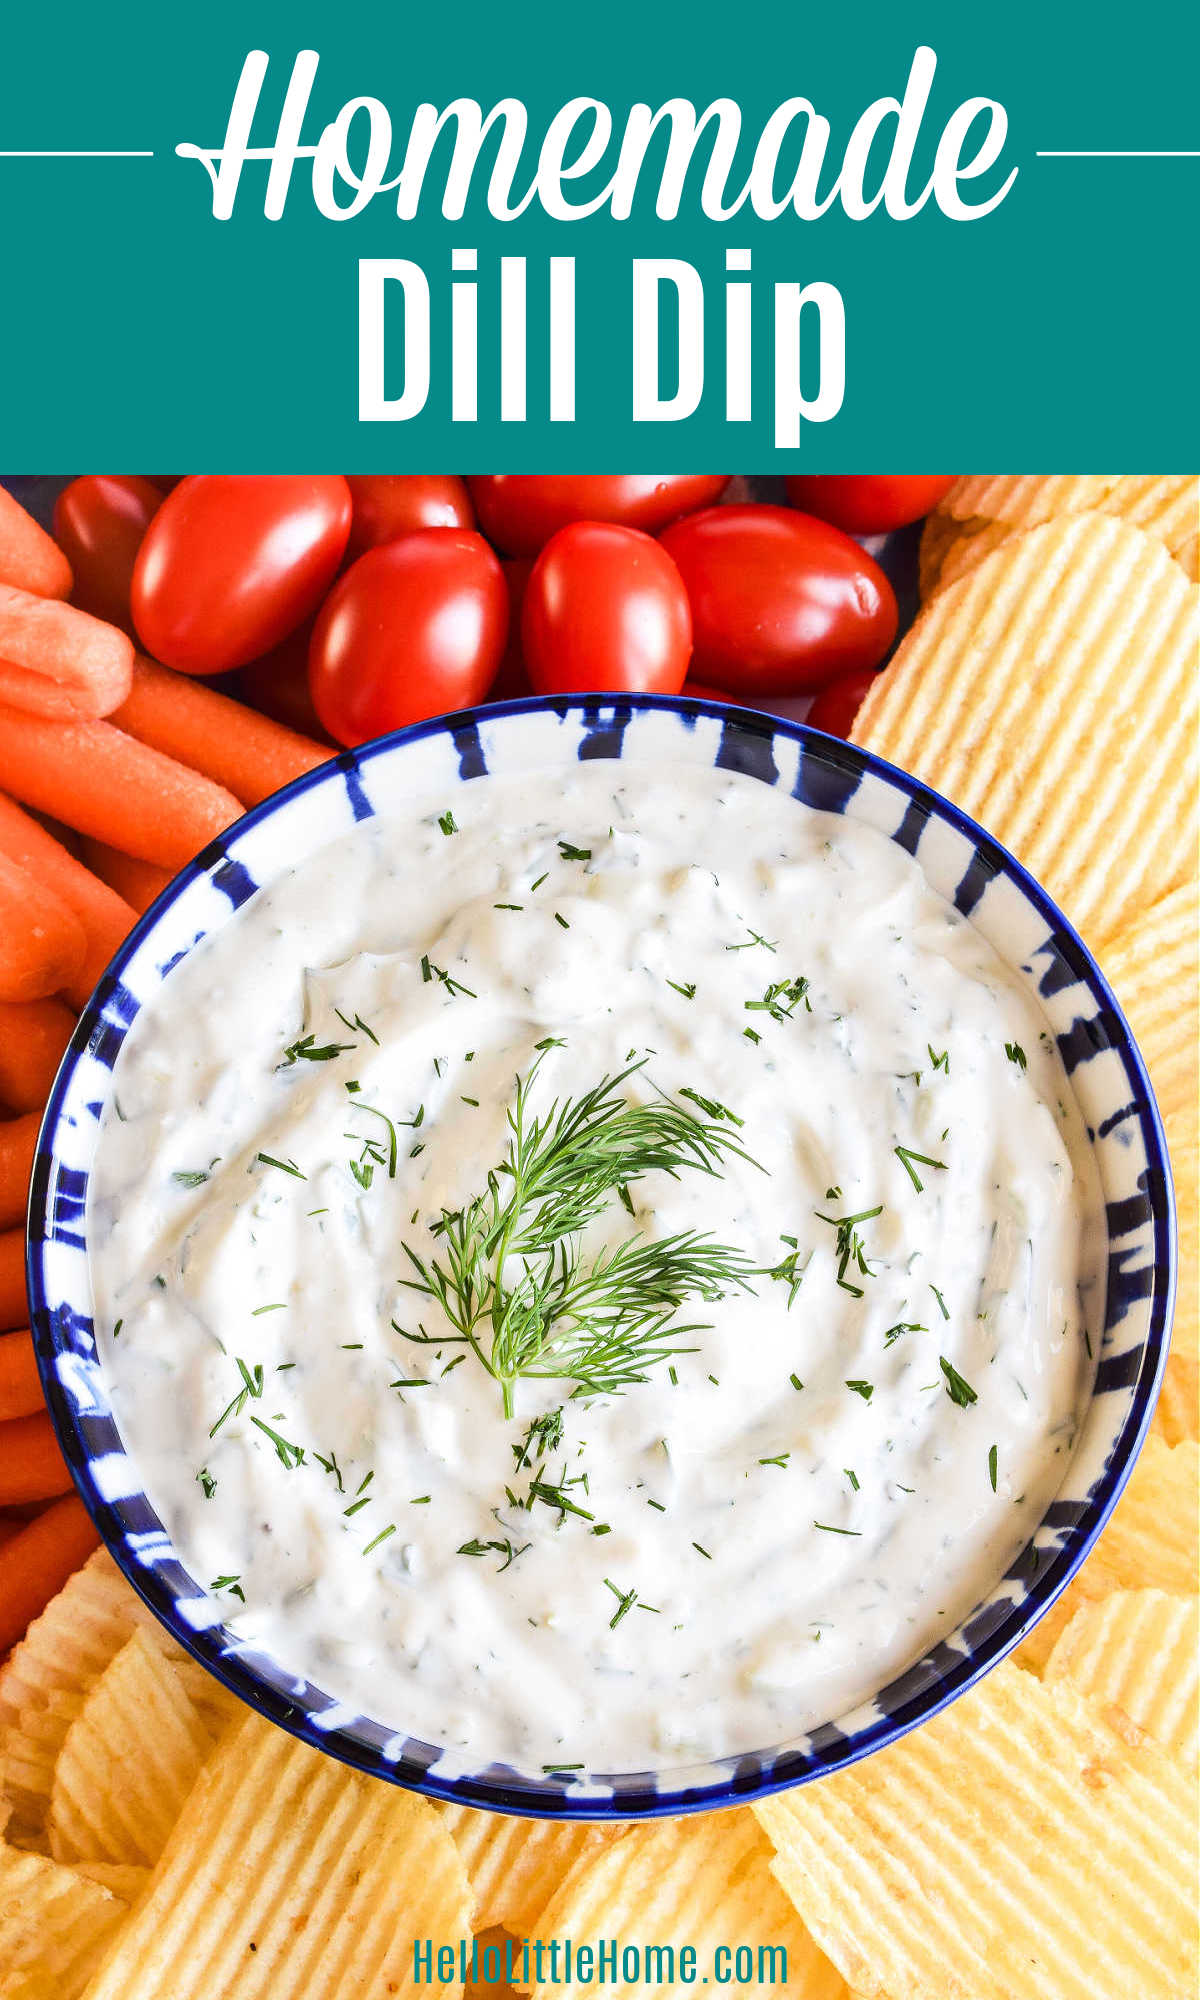 A bowl of homemade Dill Dip surrounded by chips and veggies.